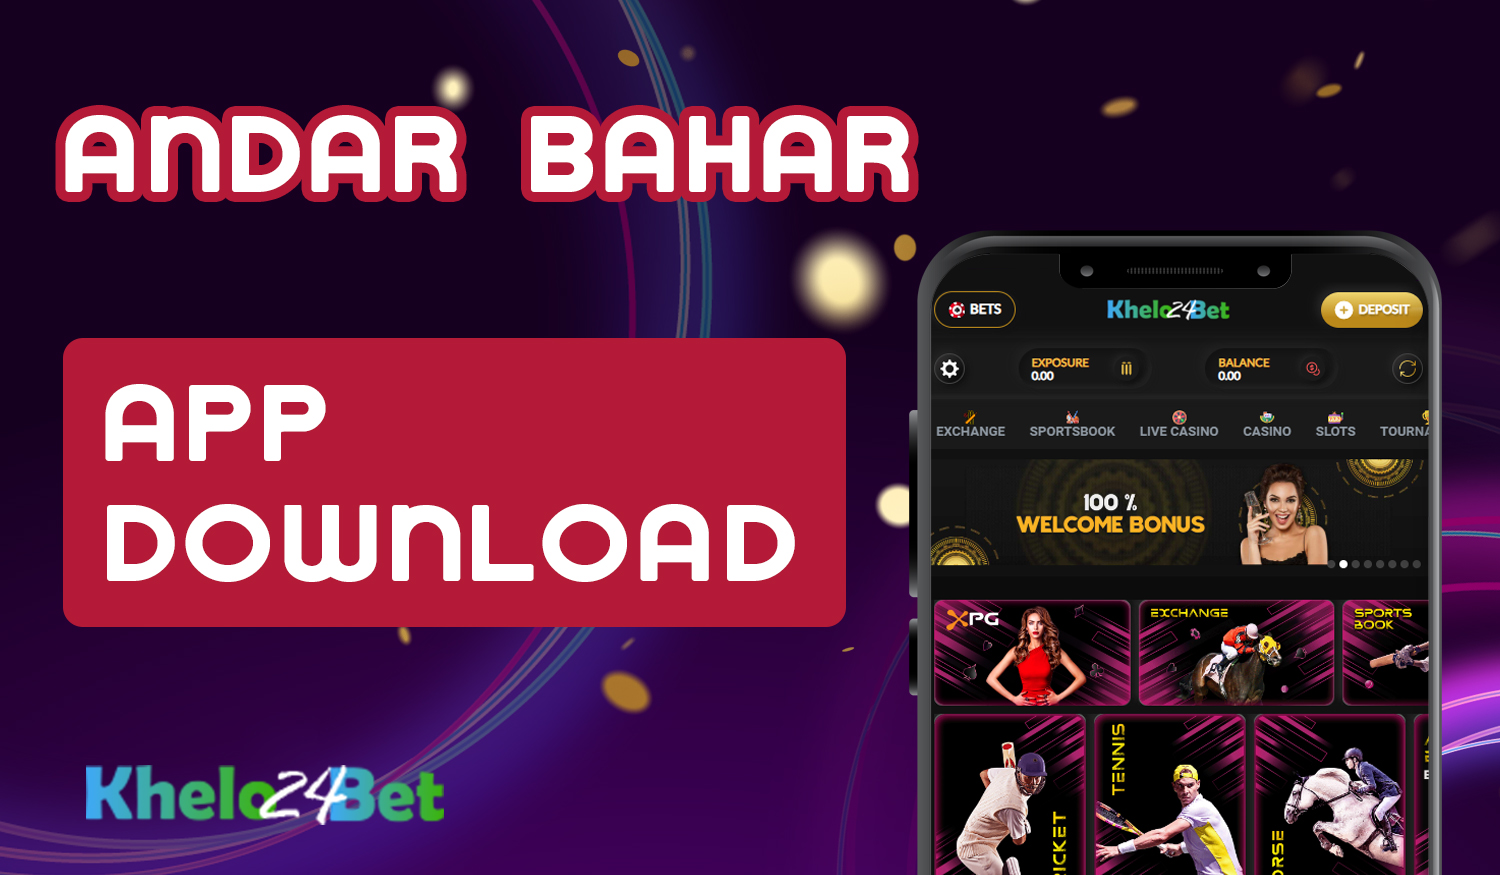 How Khelo24bet users can start playing Andar Bahar using the mobile app